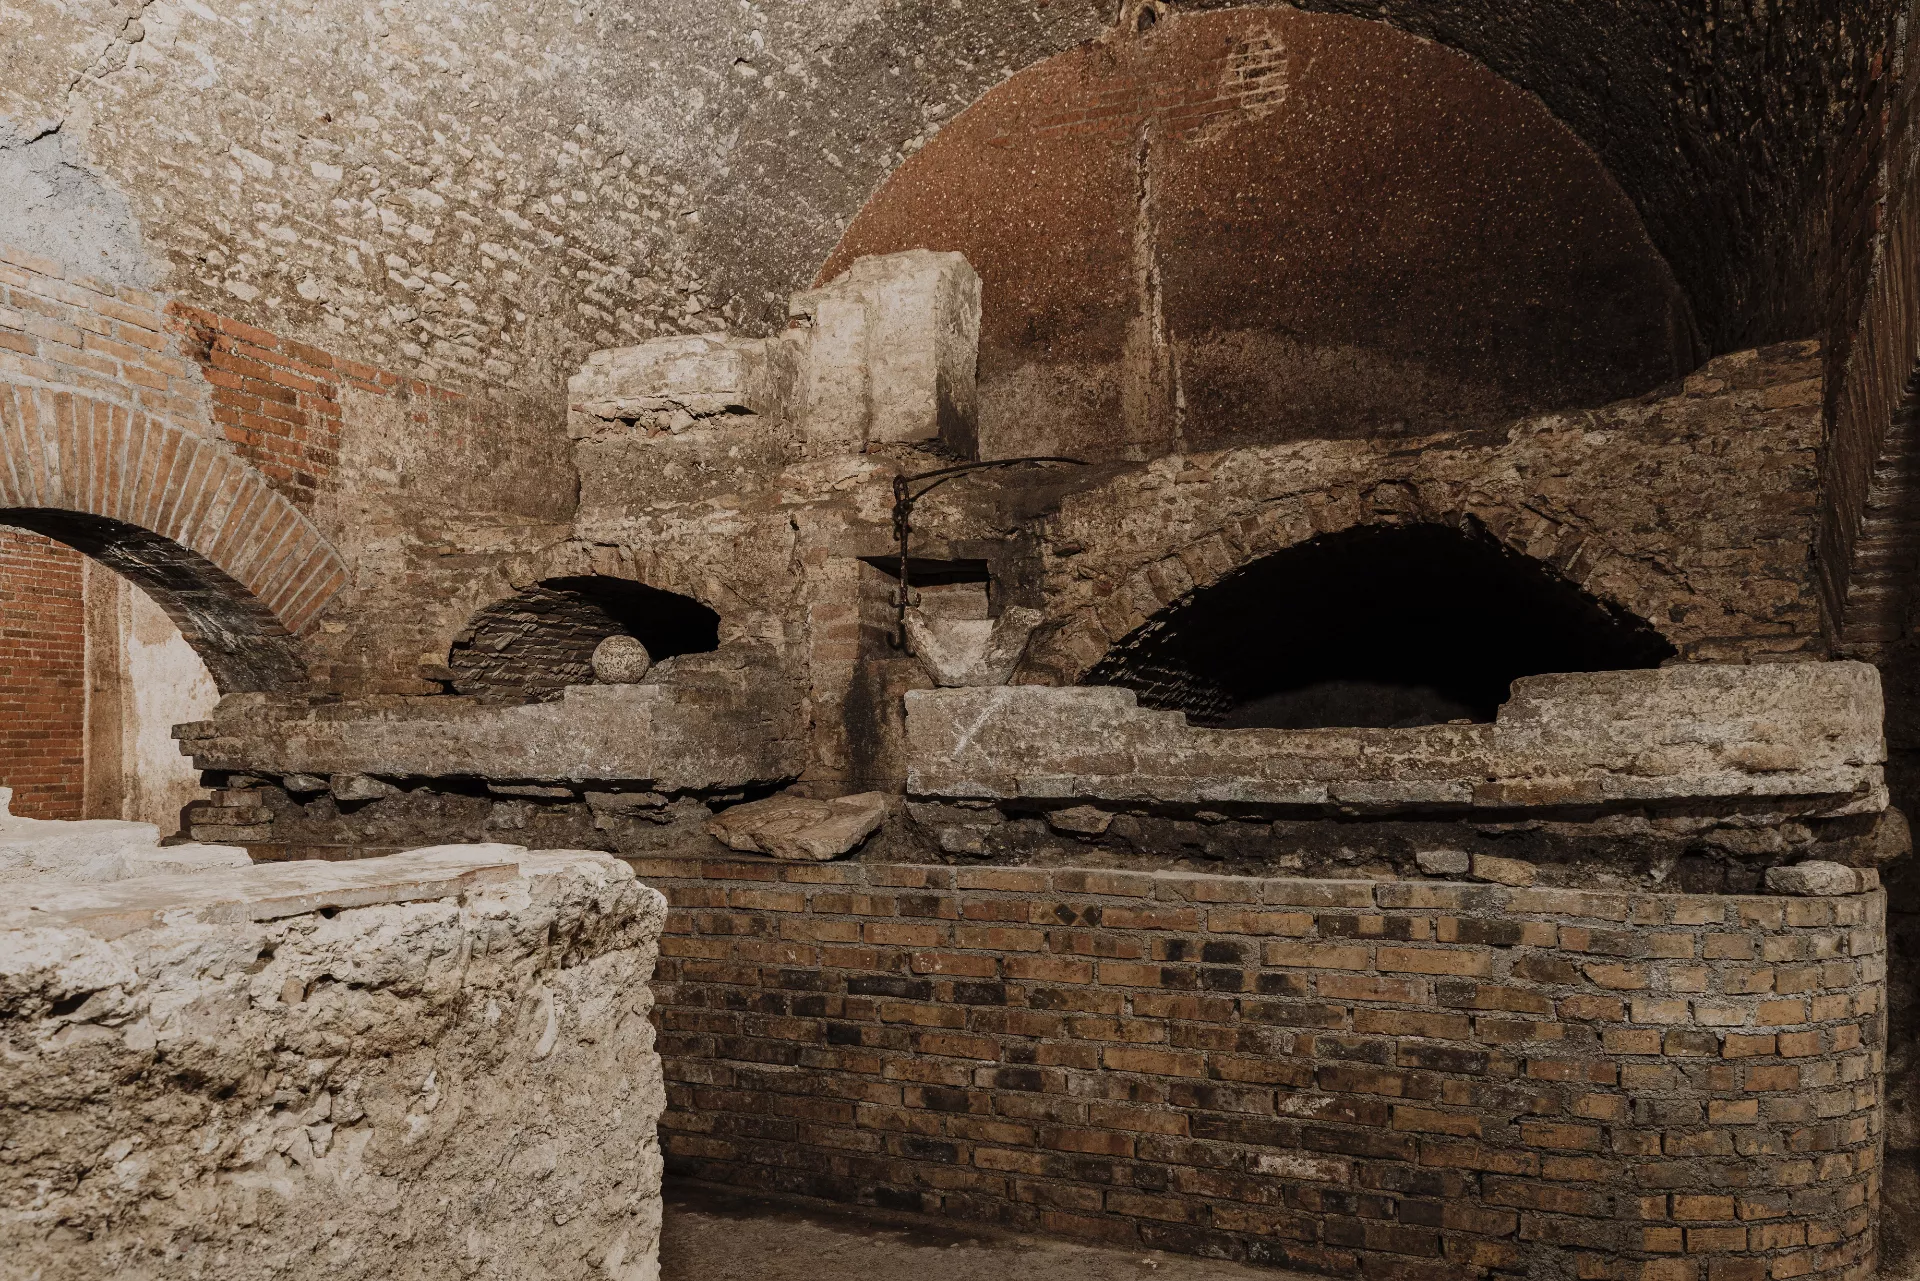 Cistern uses over the centuries